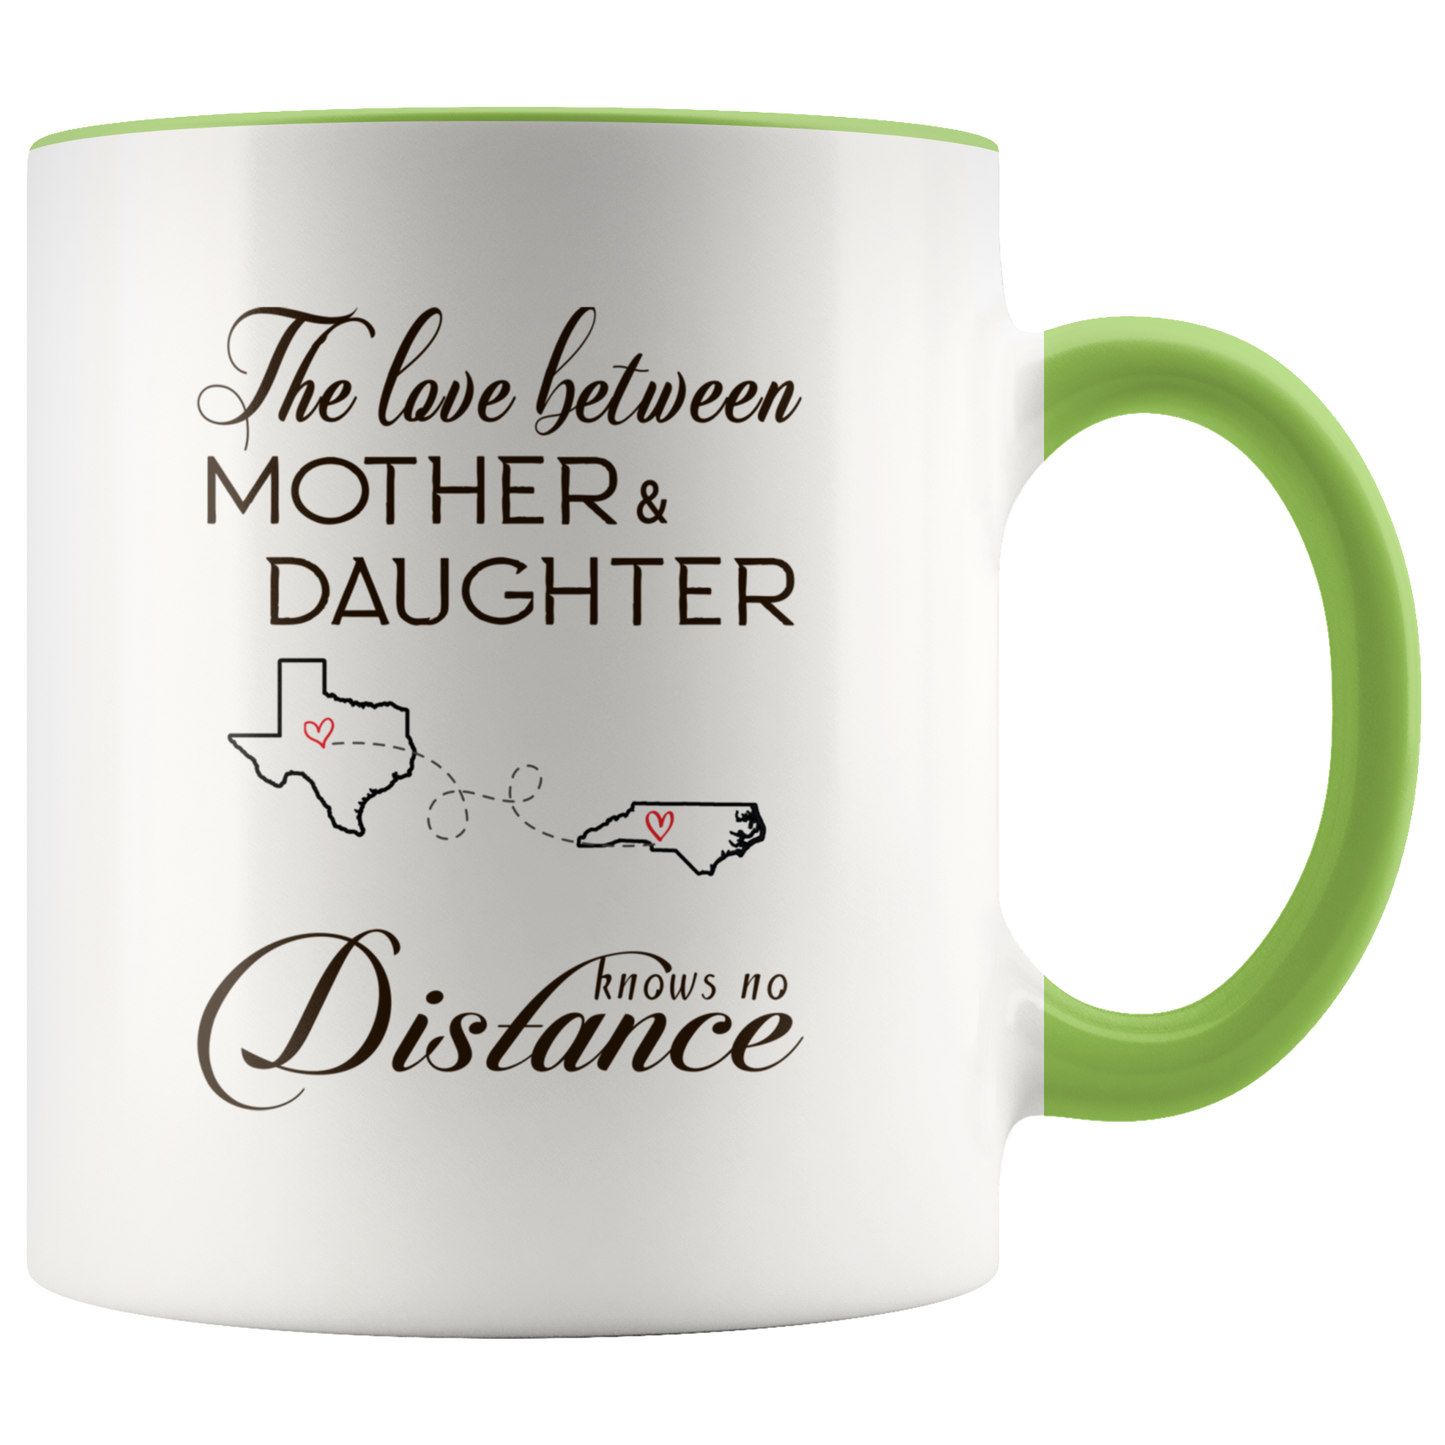 ND-21334243-sp-23807 - [ Texas | North Carolina ]Long Distance Accent Mug 11 oz Red - The Love Between Mother